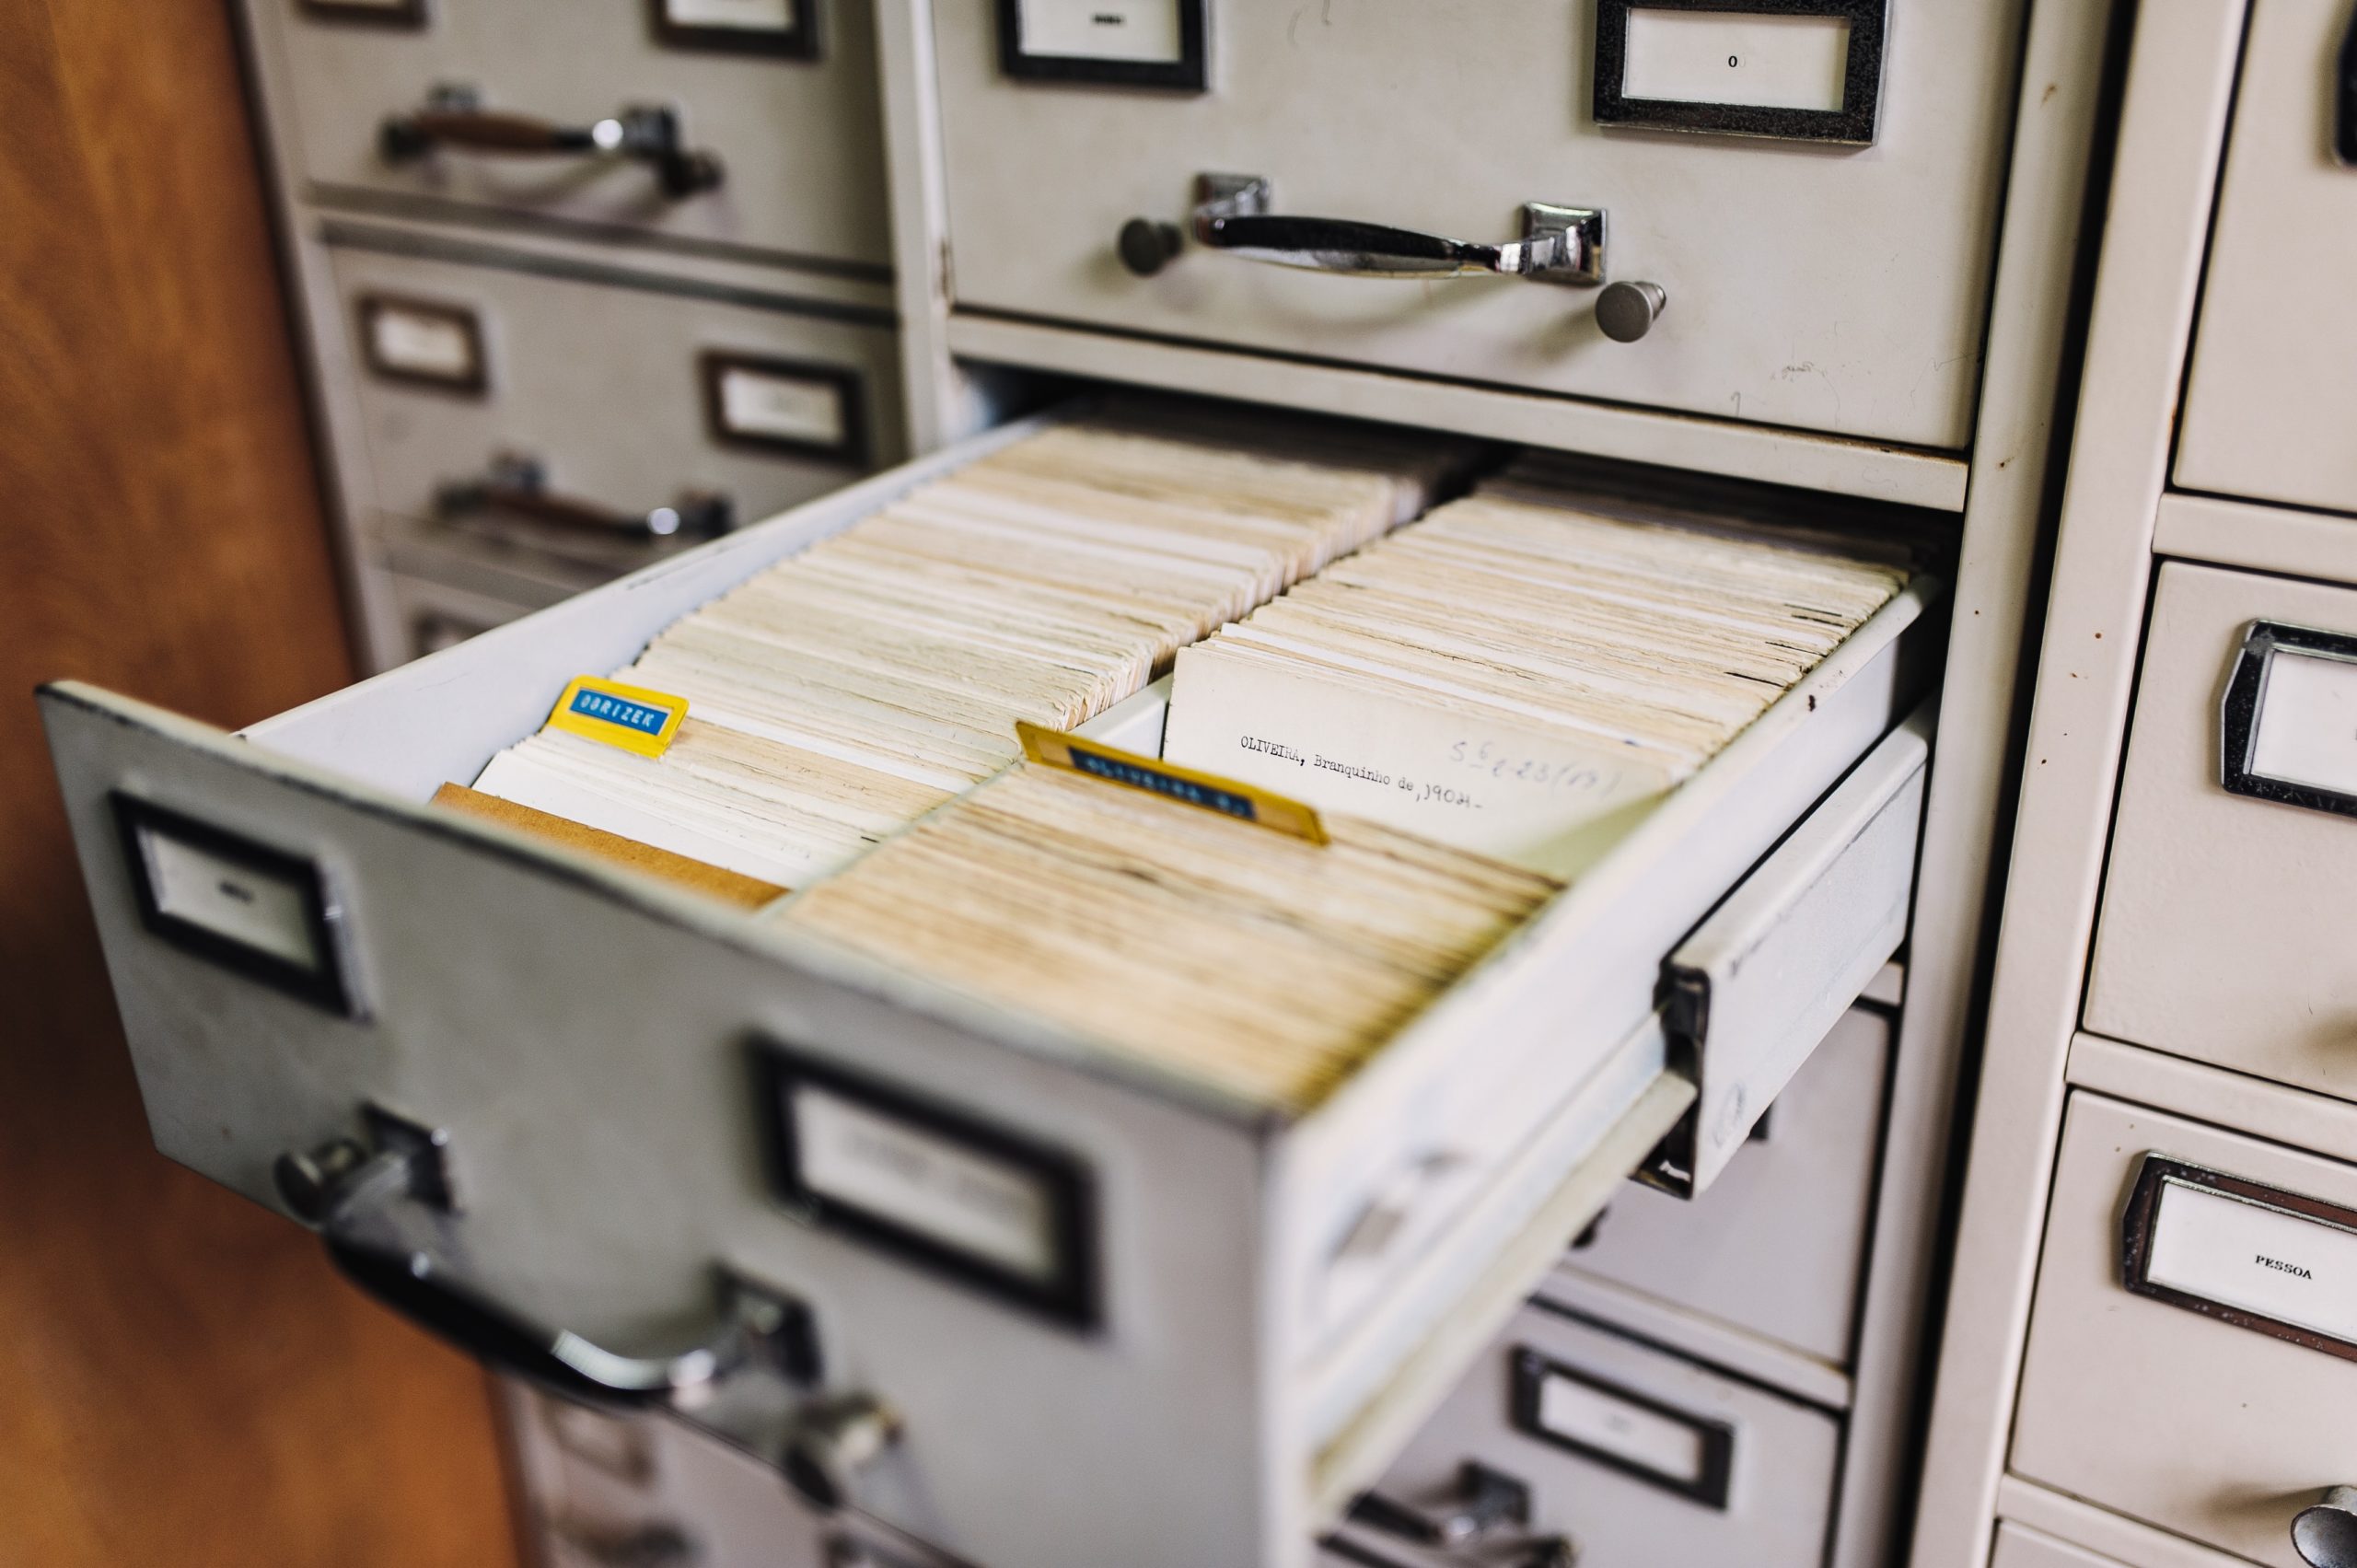 A filled file cabinet with one of its drawers pulled out